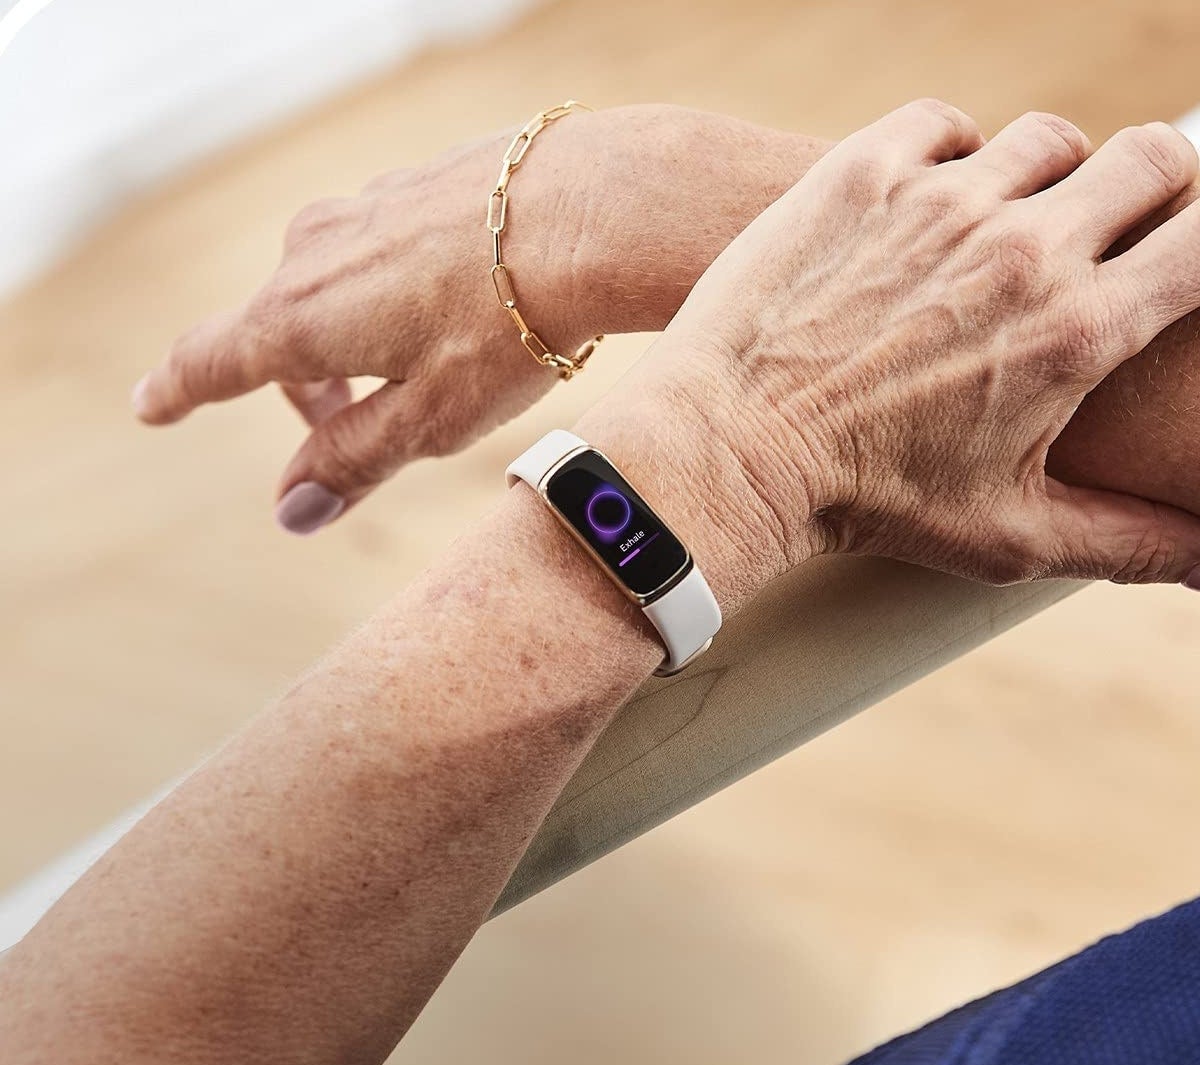 A person wearing the FitBit on their wrist